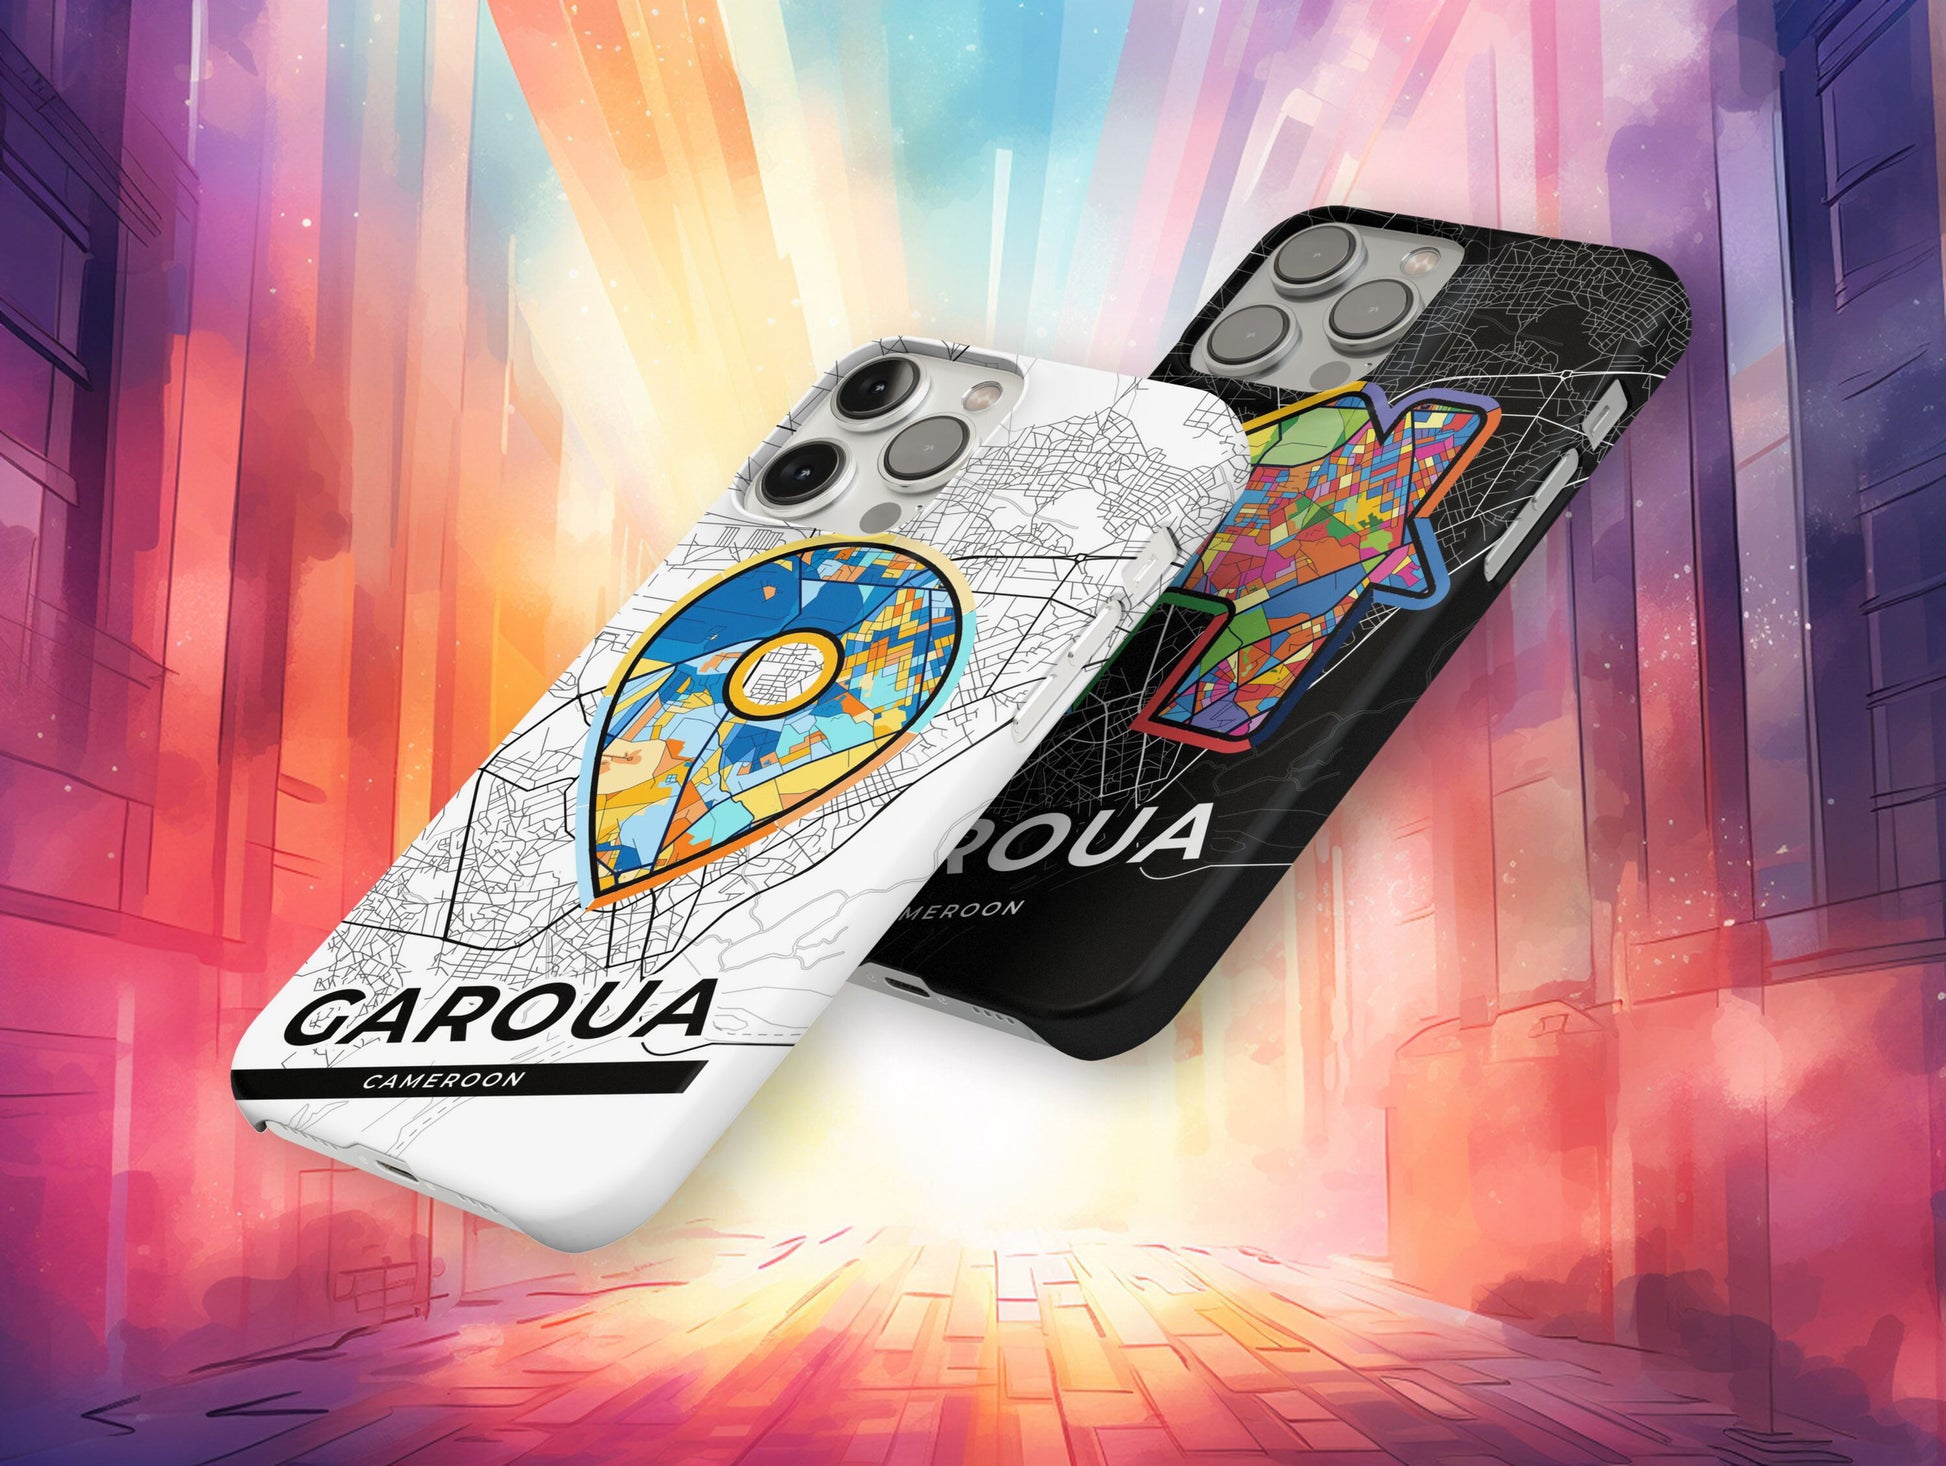 Garoua Cameroon slim phone case with colorful icon. Birthday, wedding or housewarming gift. Couple match cases.